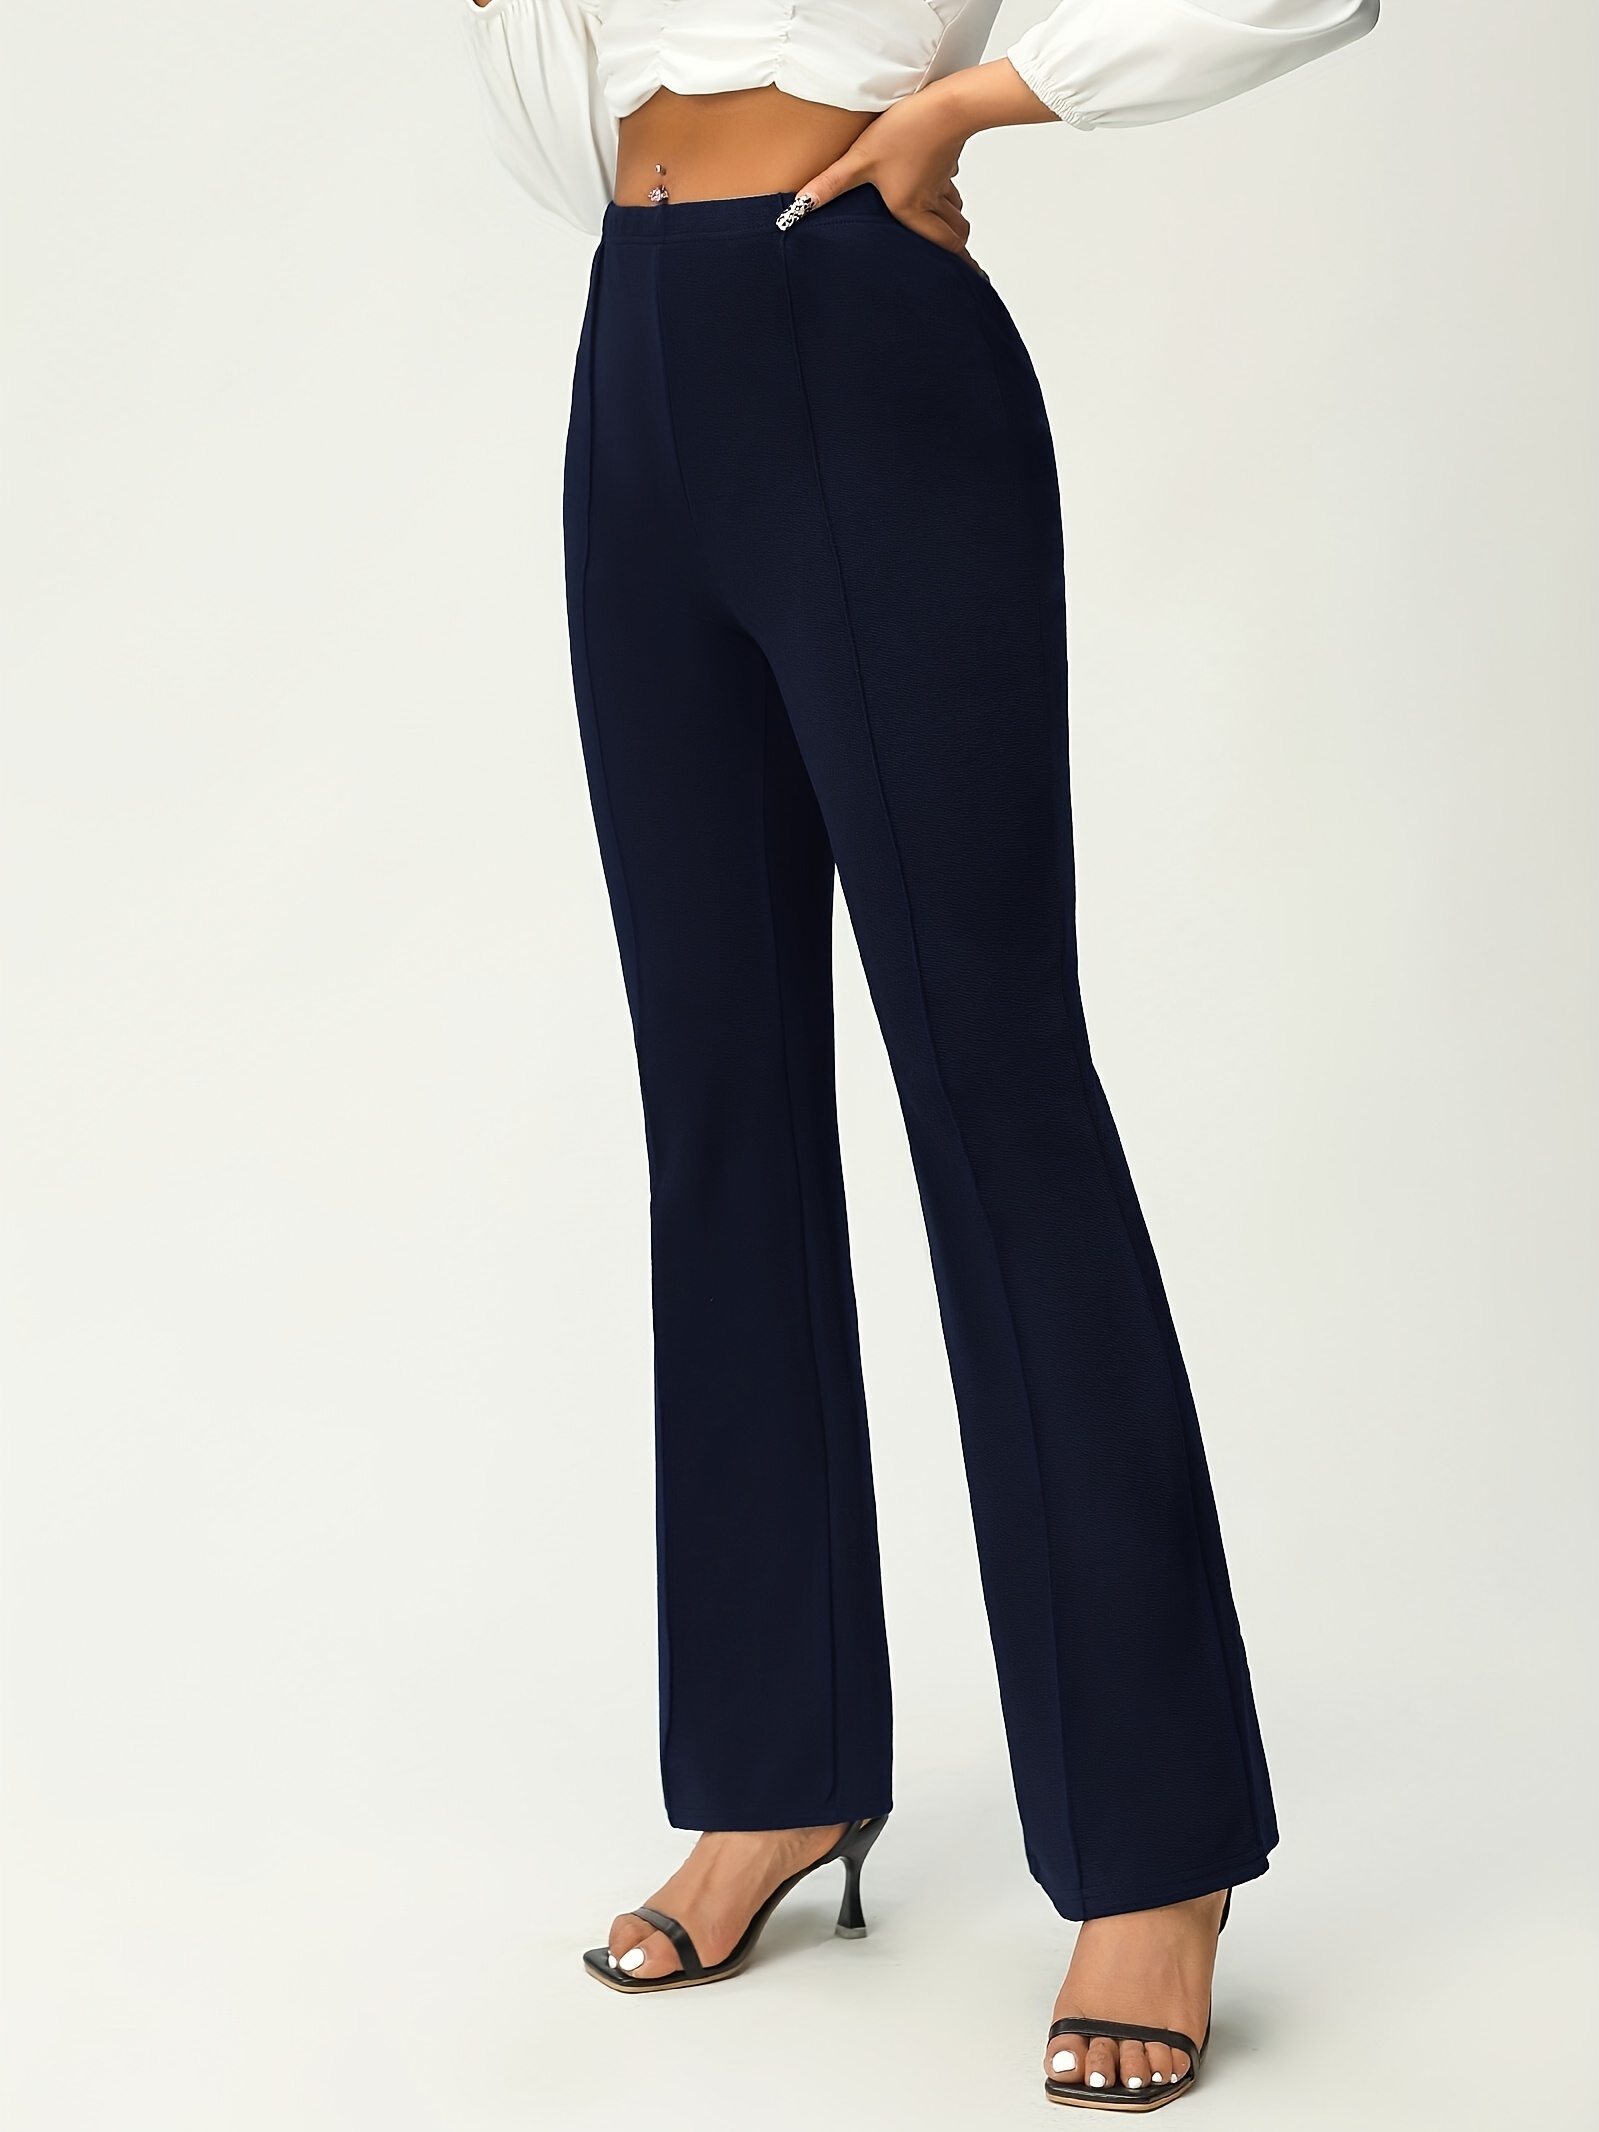 Navy High Waist Fitted Palazzo Pants  Business outfits women, Professional  outfits, Work outfits women